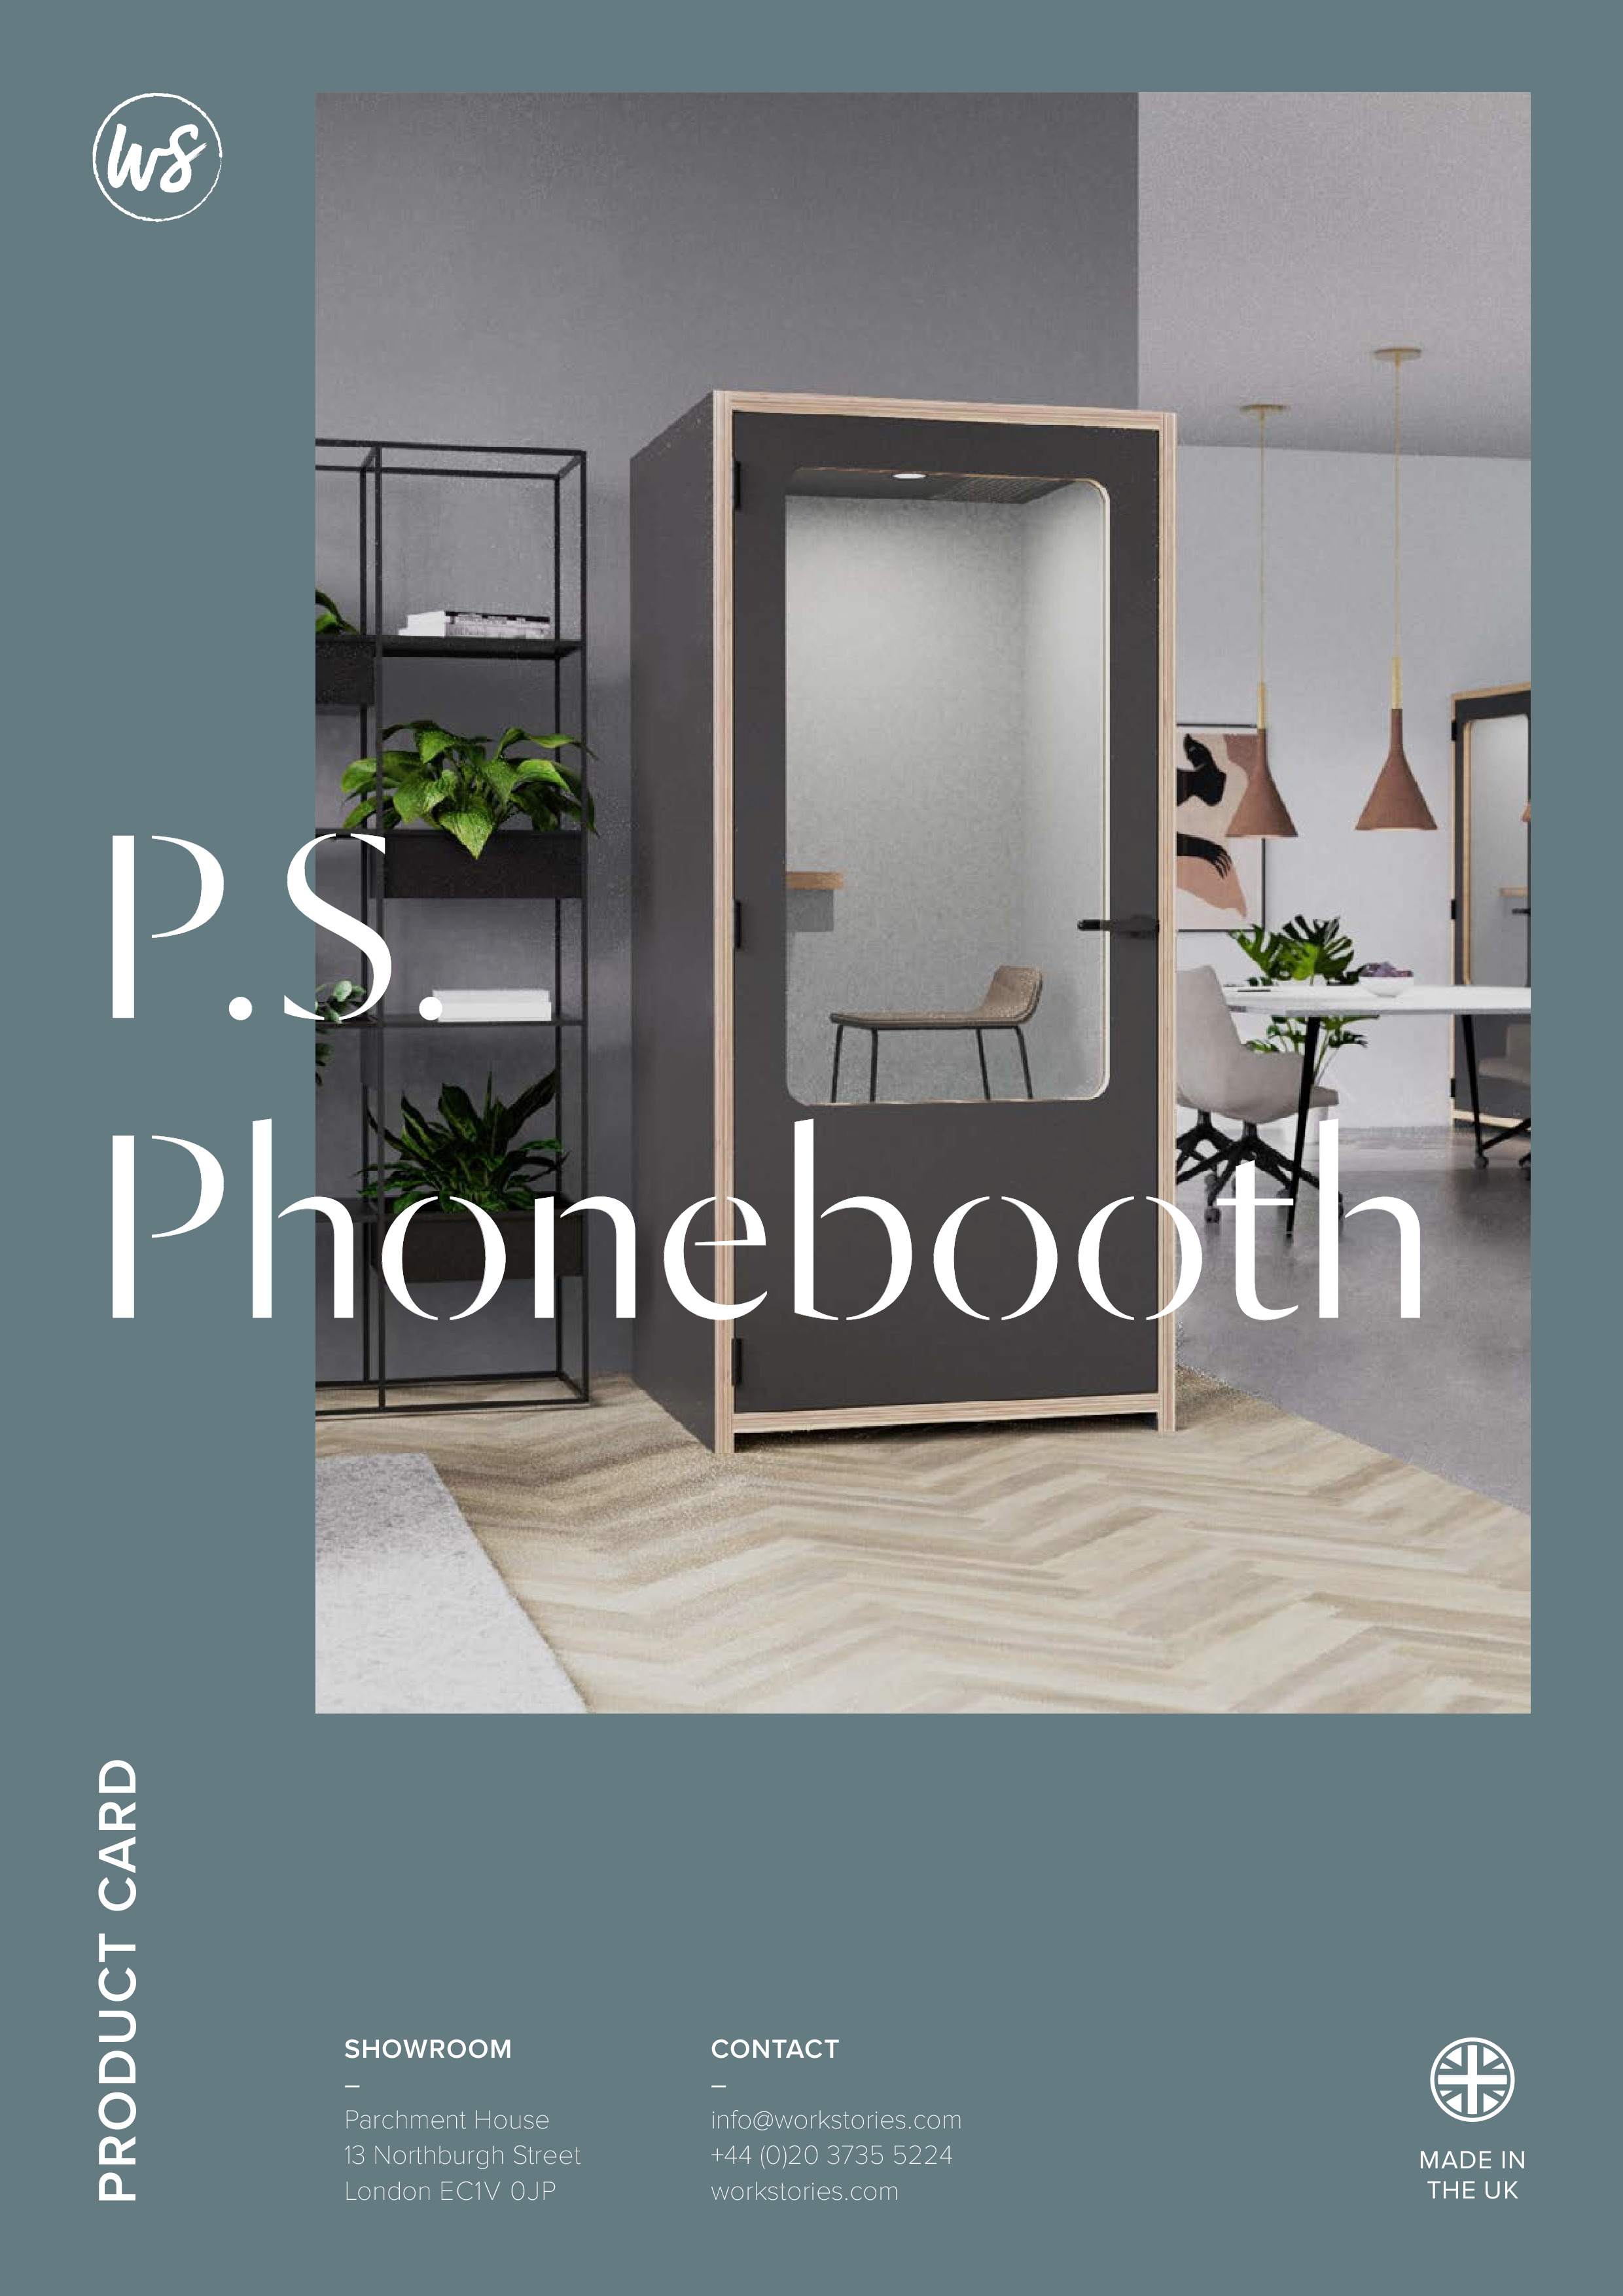 WS - P.S Phonebooth - Product Card